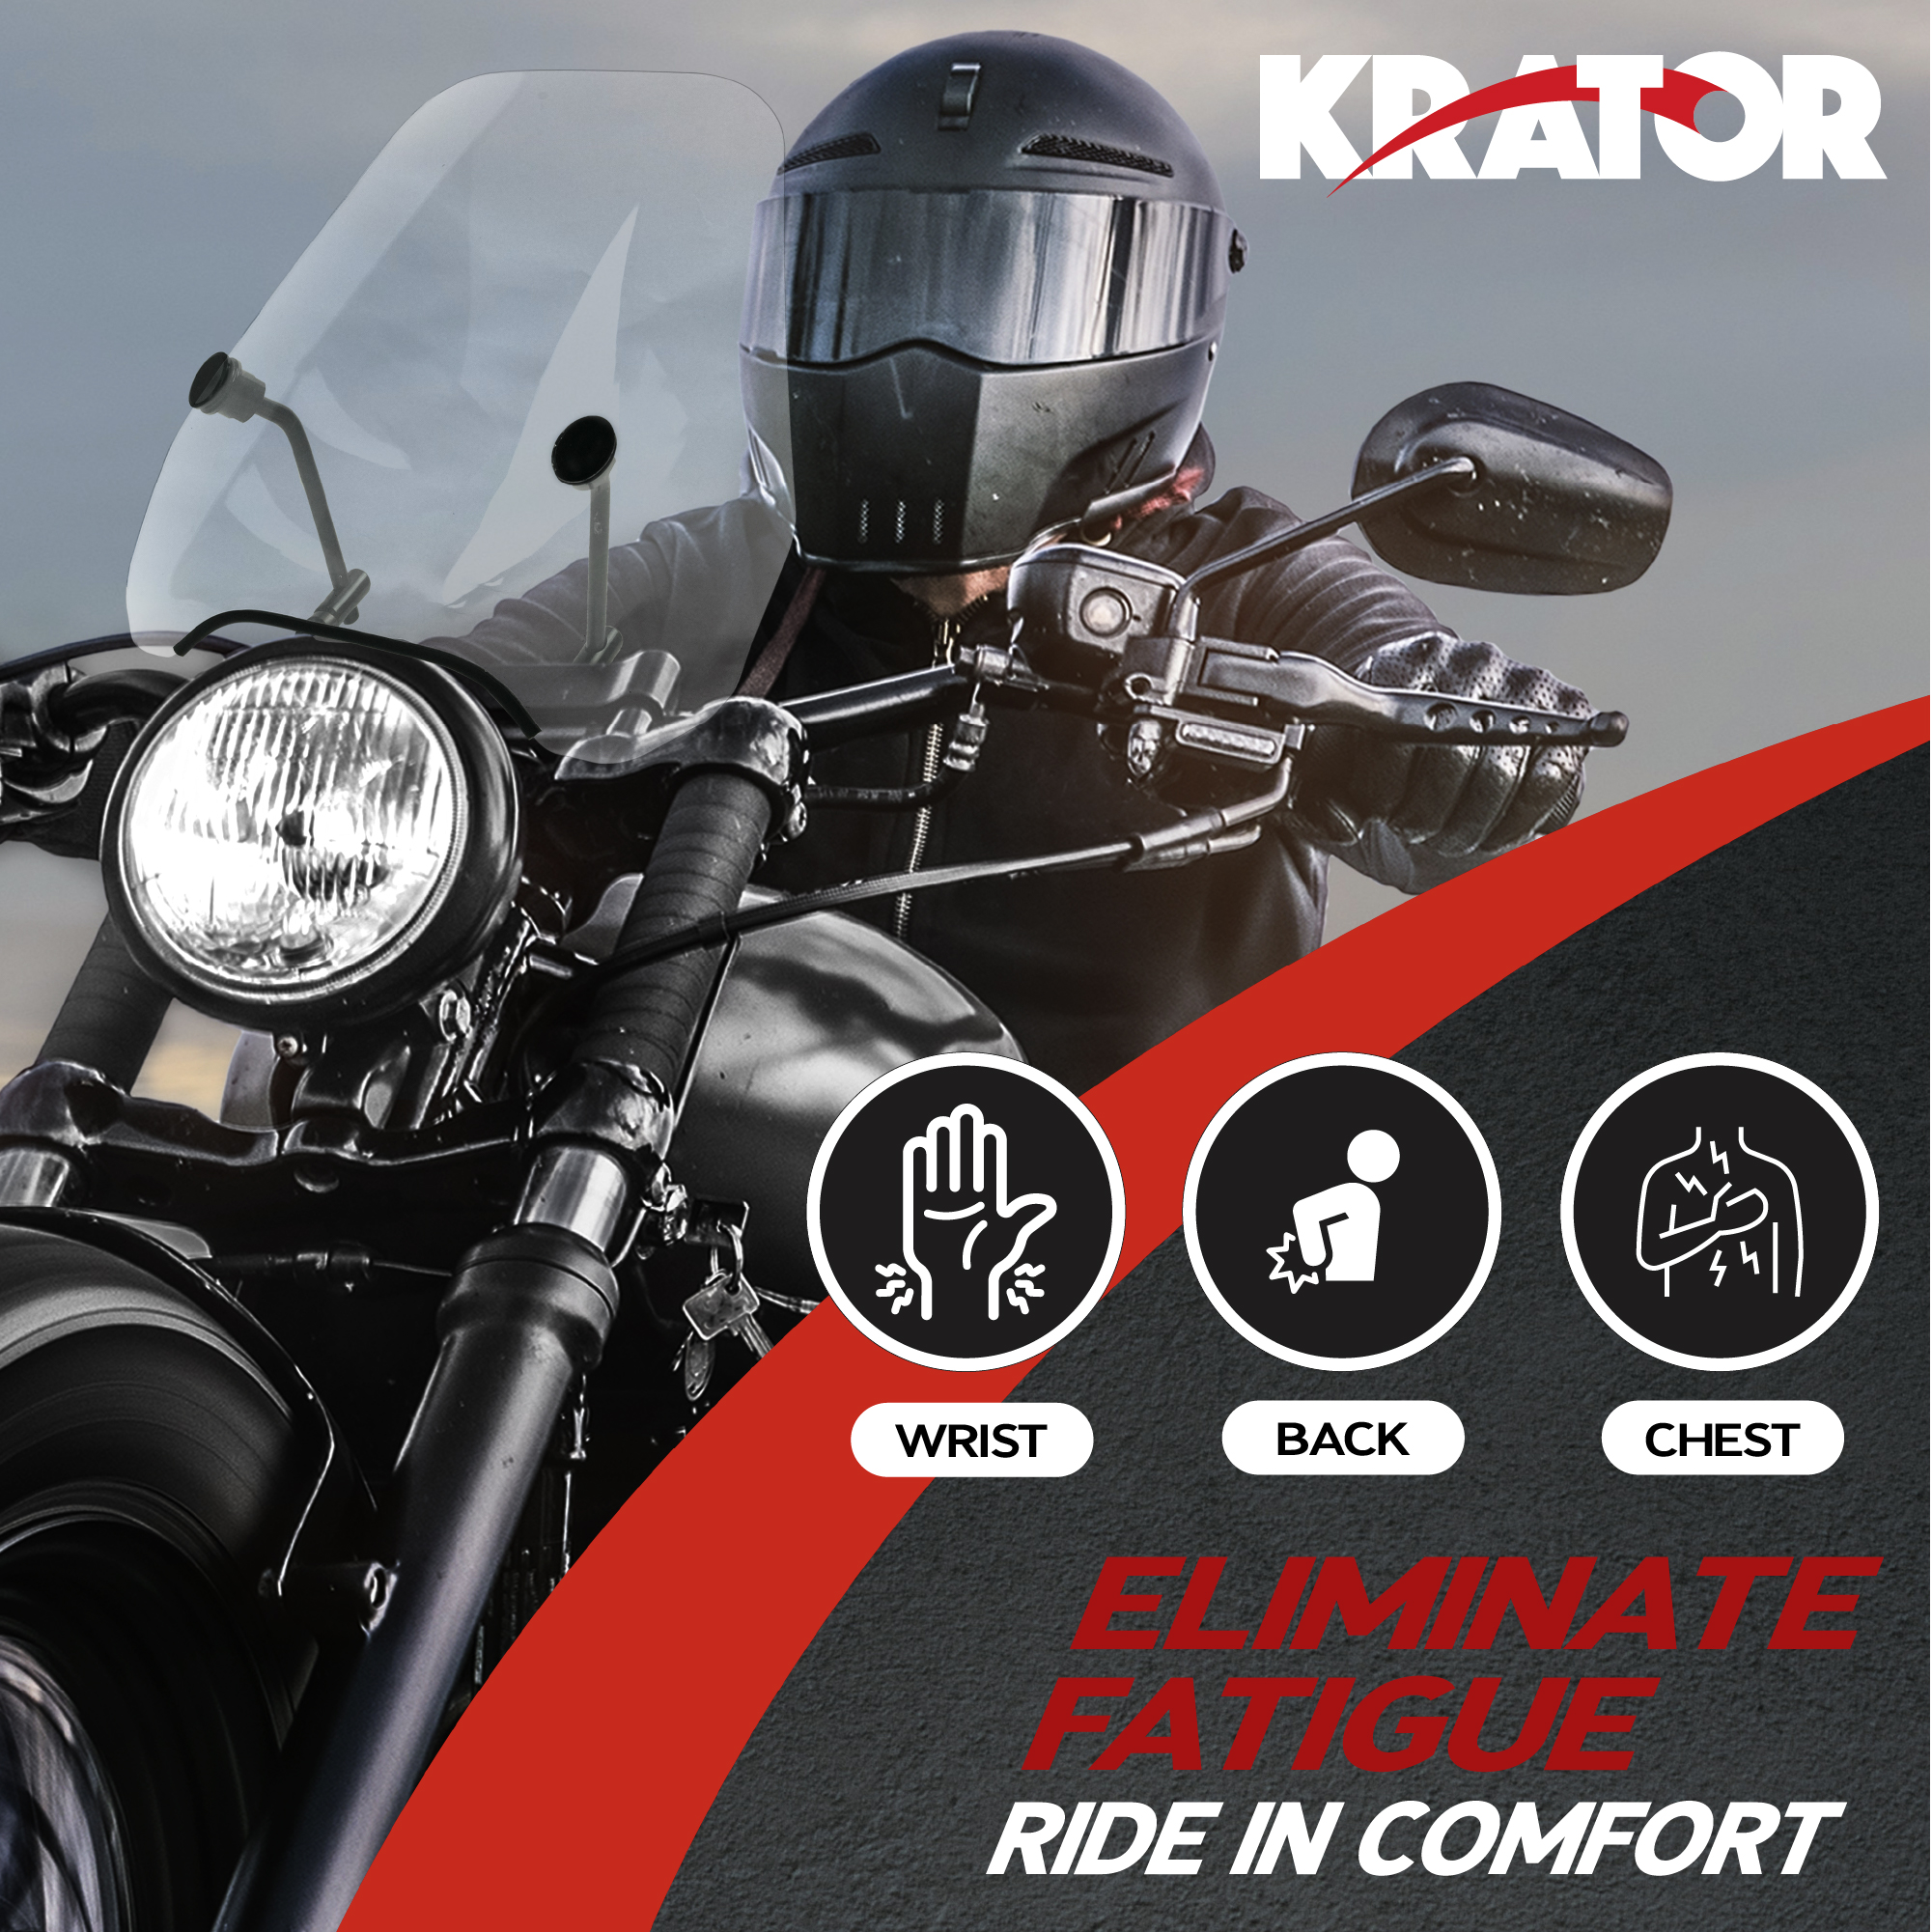 Krator 15" Clear Tinted Windscreen Windshield Compatible with Harley-Davidson Softail FXCW/C Rockers (2008-2011) Fits 7/8" or 1"